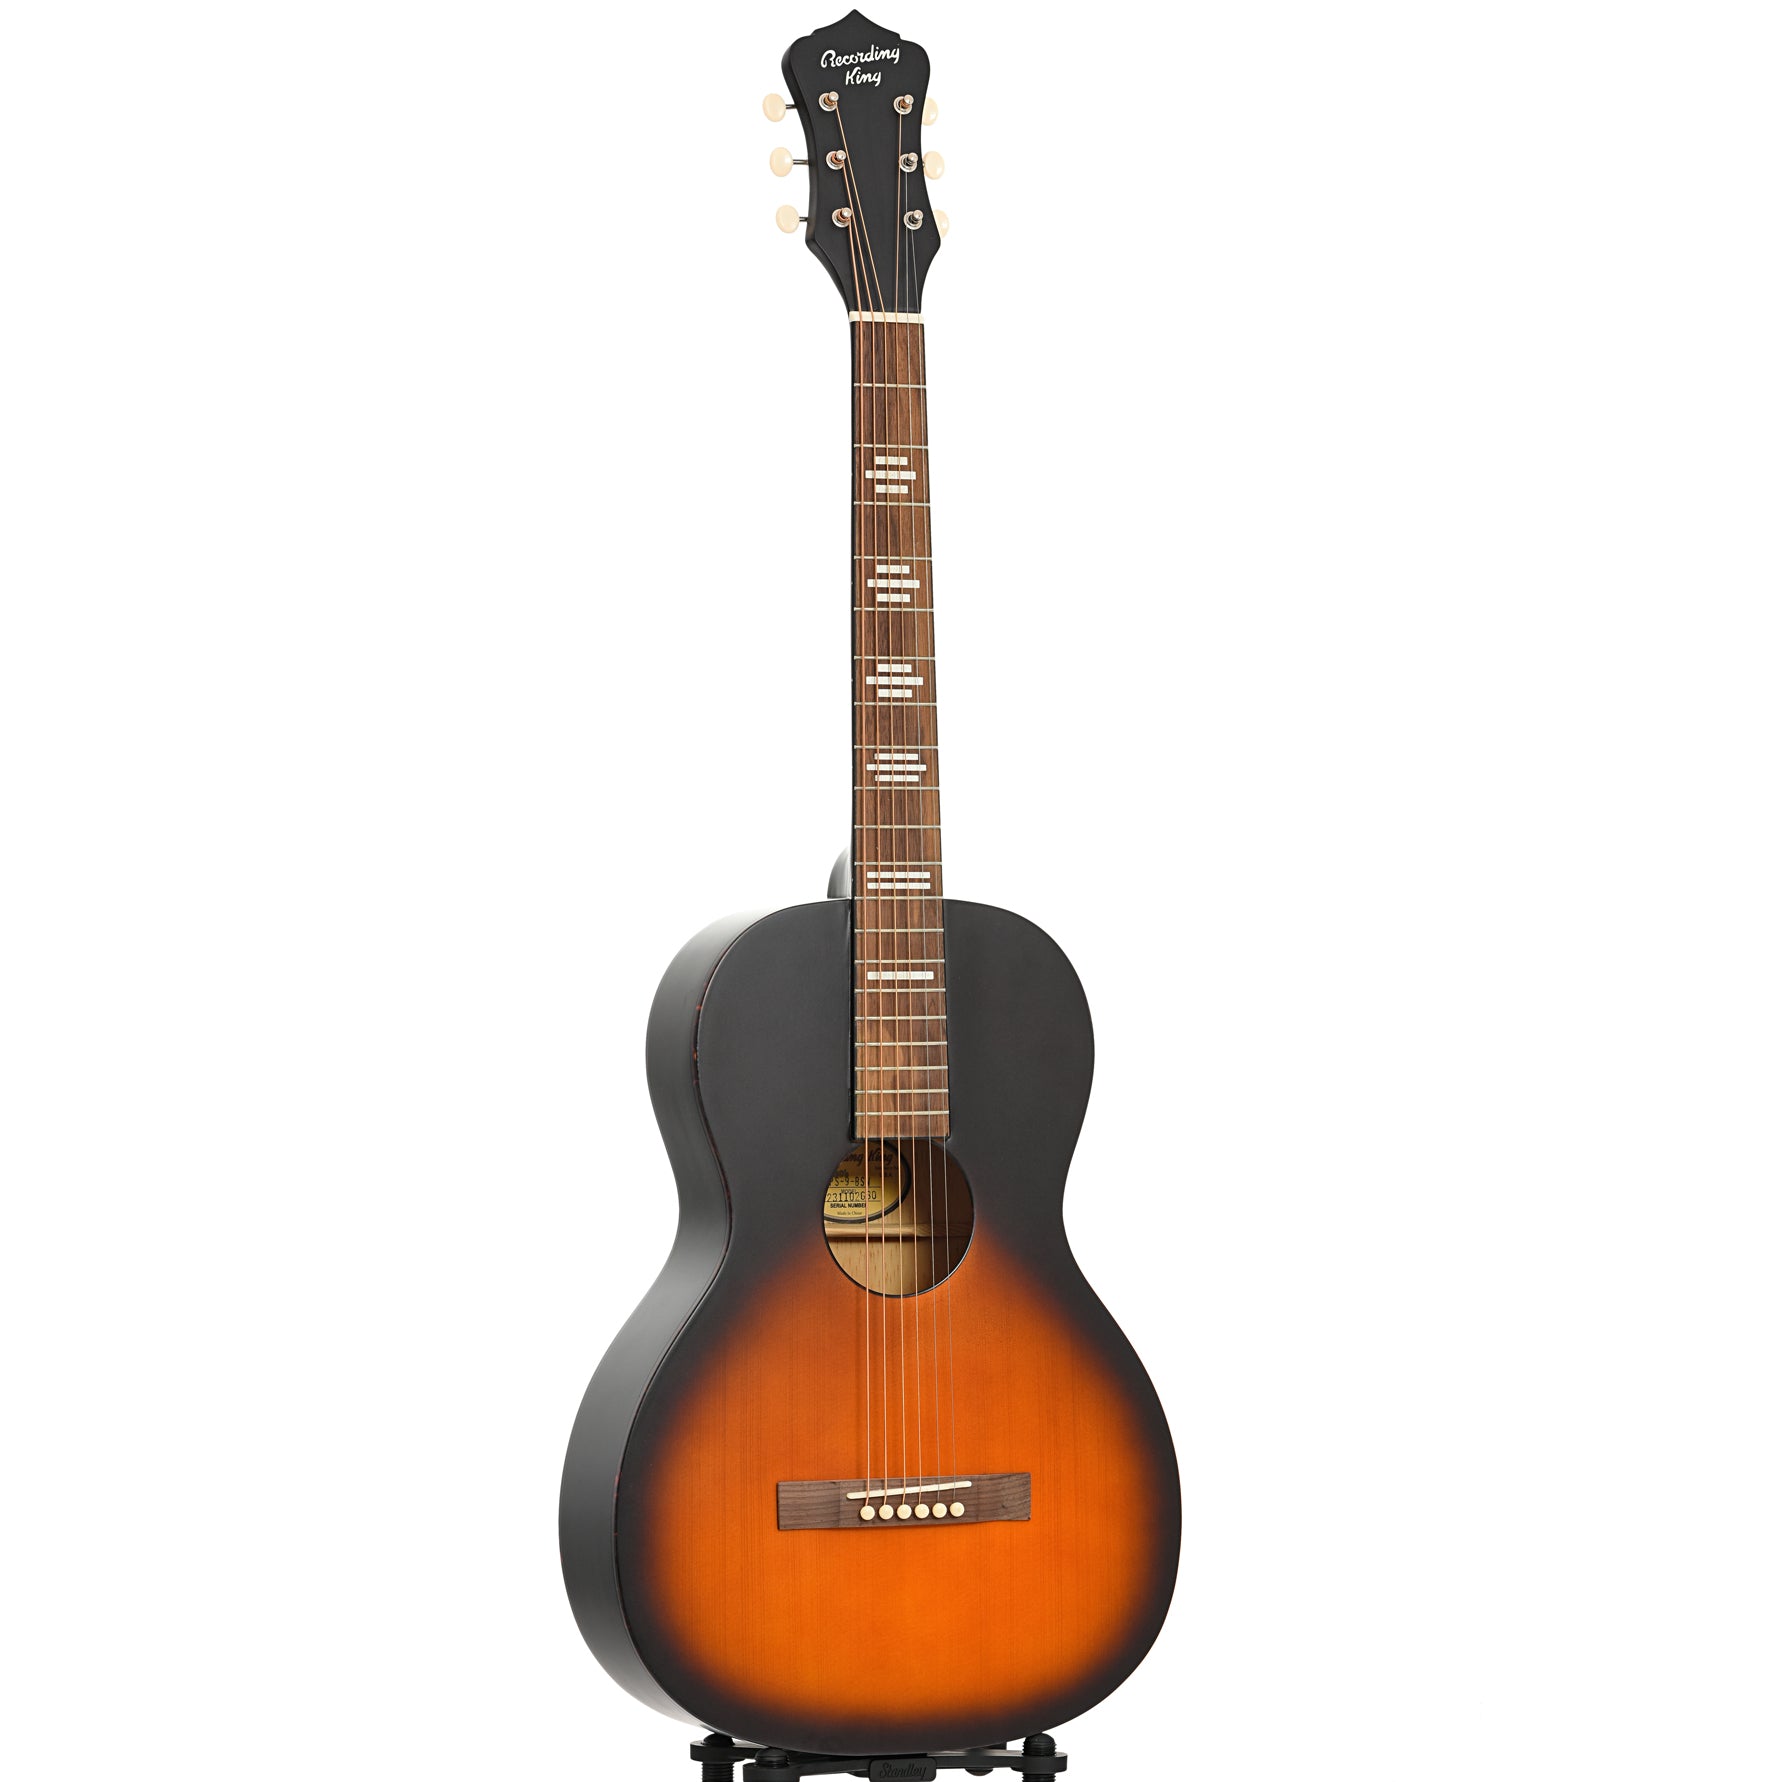 Full front and side of Recording King Dirty 30s Series 9 SE Single 0 Black Sunburst Acoustic Guitar